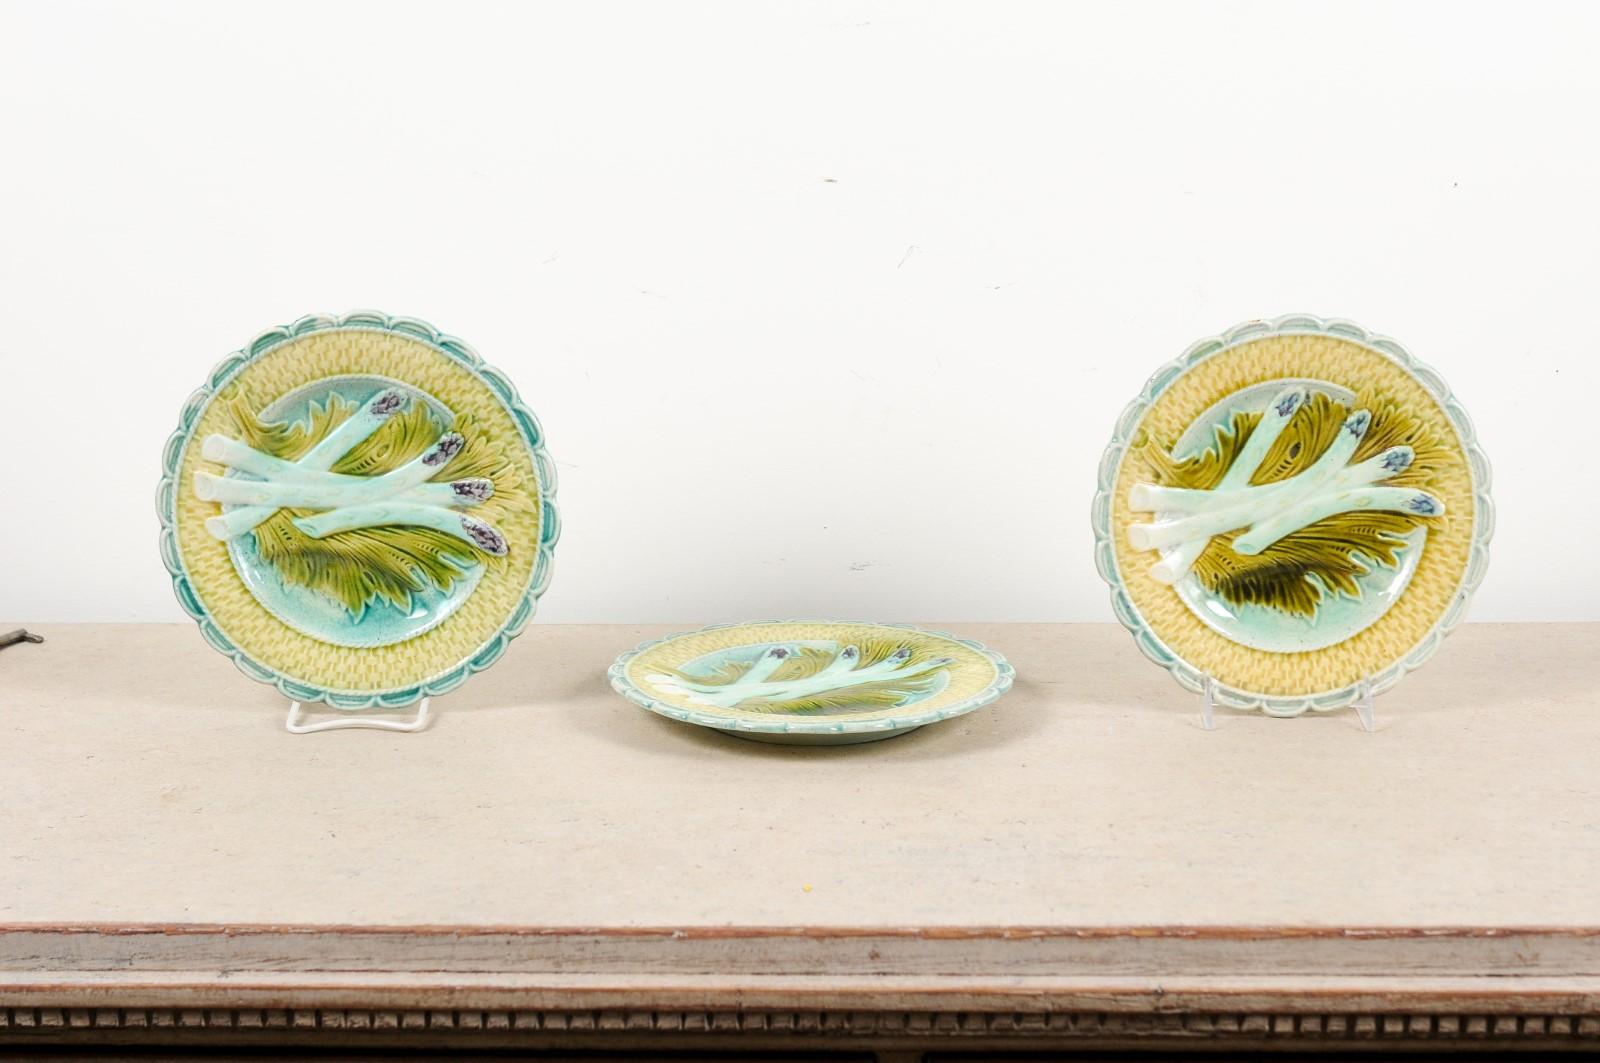 A French Napoleon III period majolica asparagus plate from the mid-19th century, with scalloped edge, turquoise and chartreuse style tones. We currently have three plates available, priced and sold individually. Created in France at the beginning of